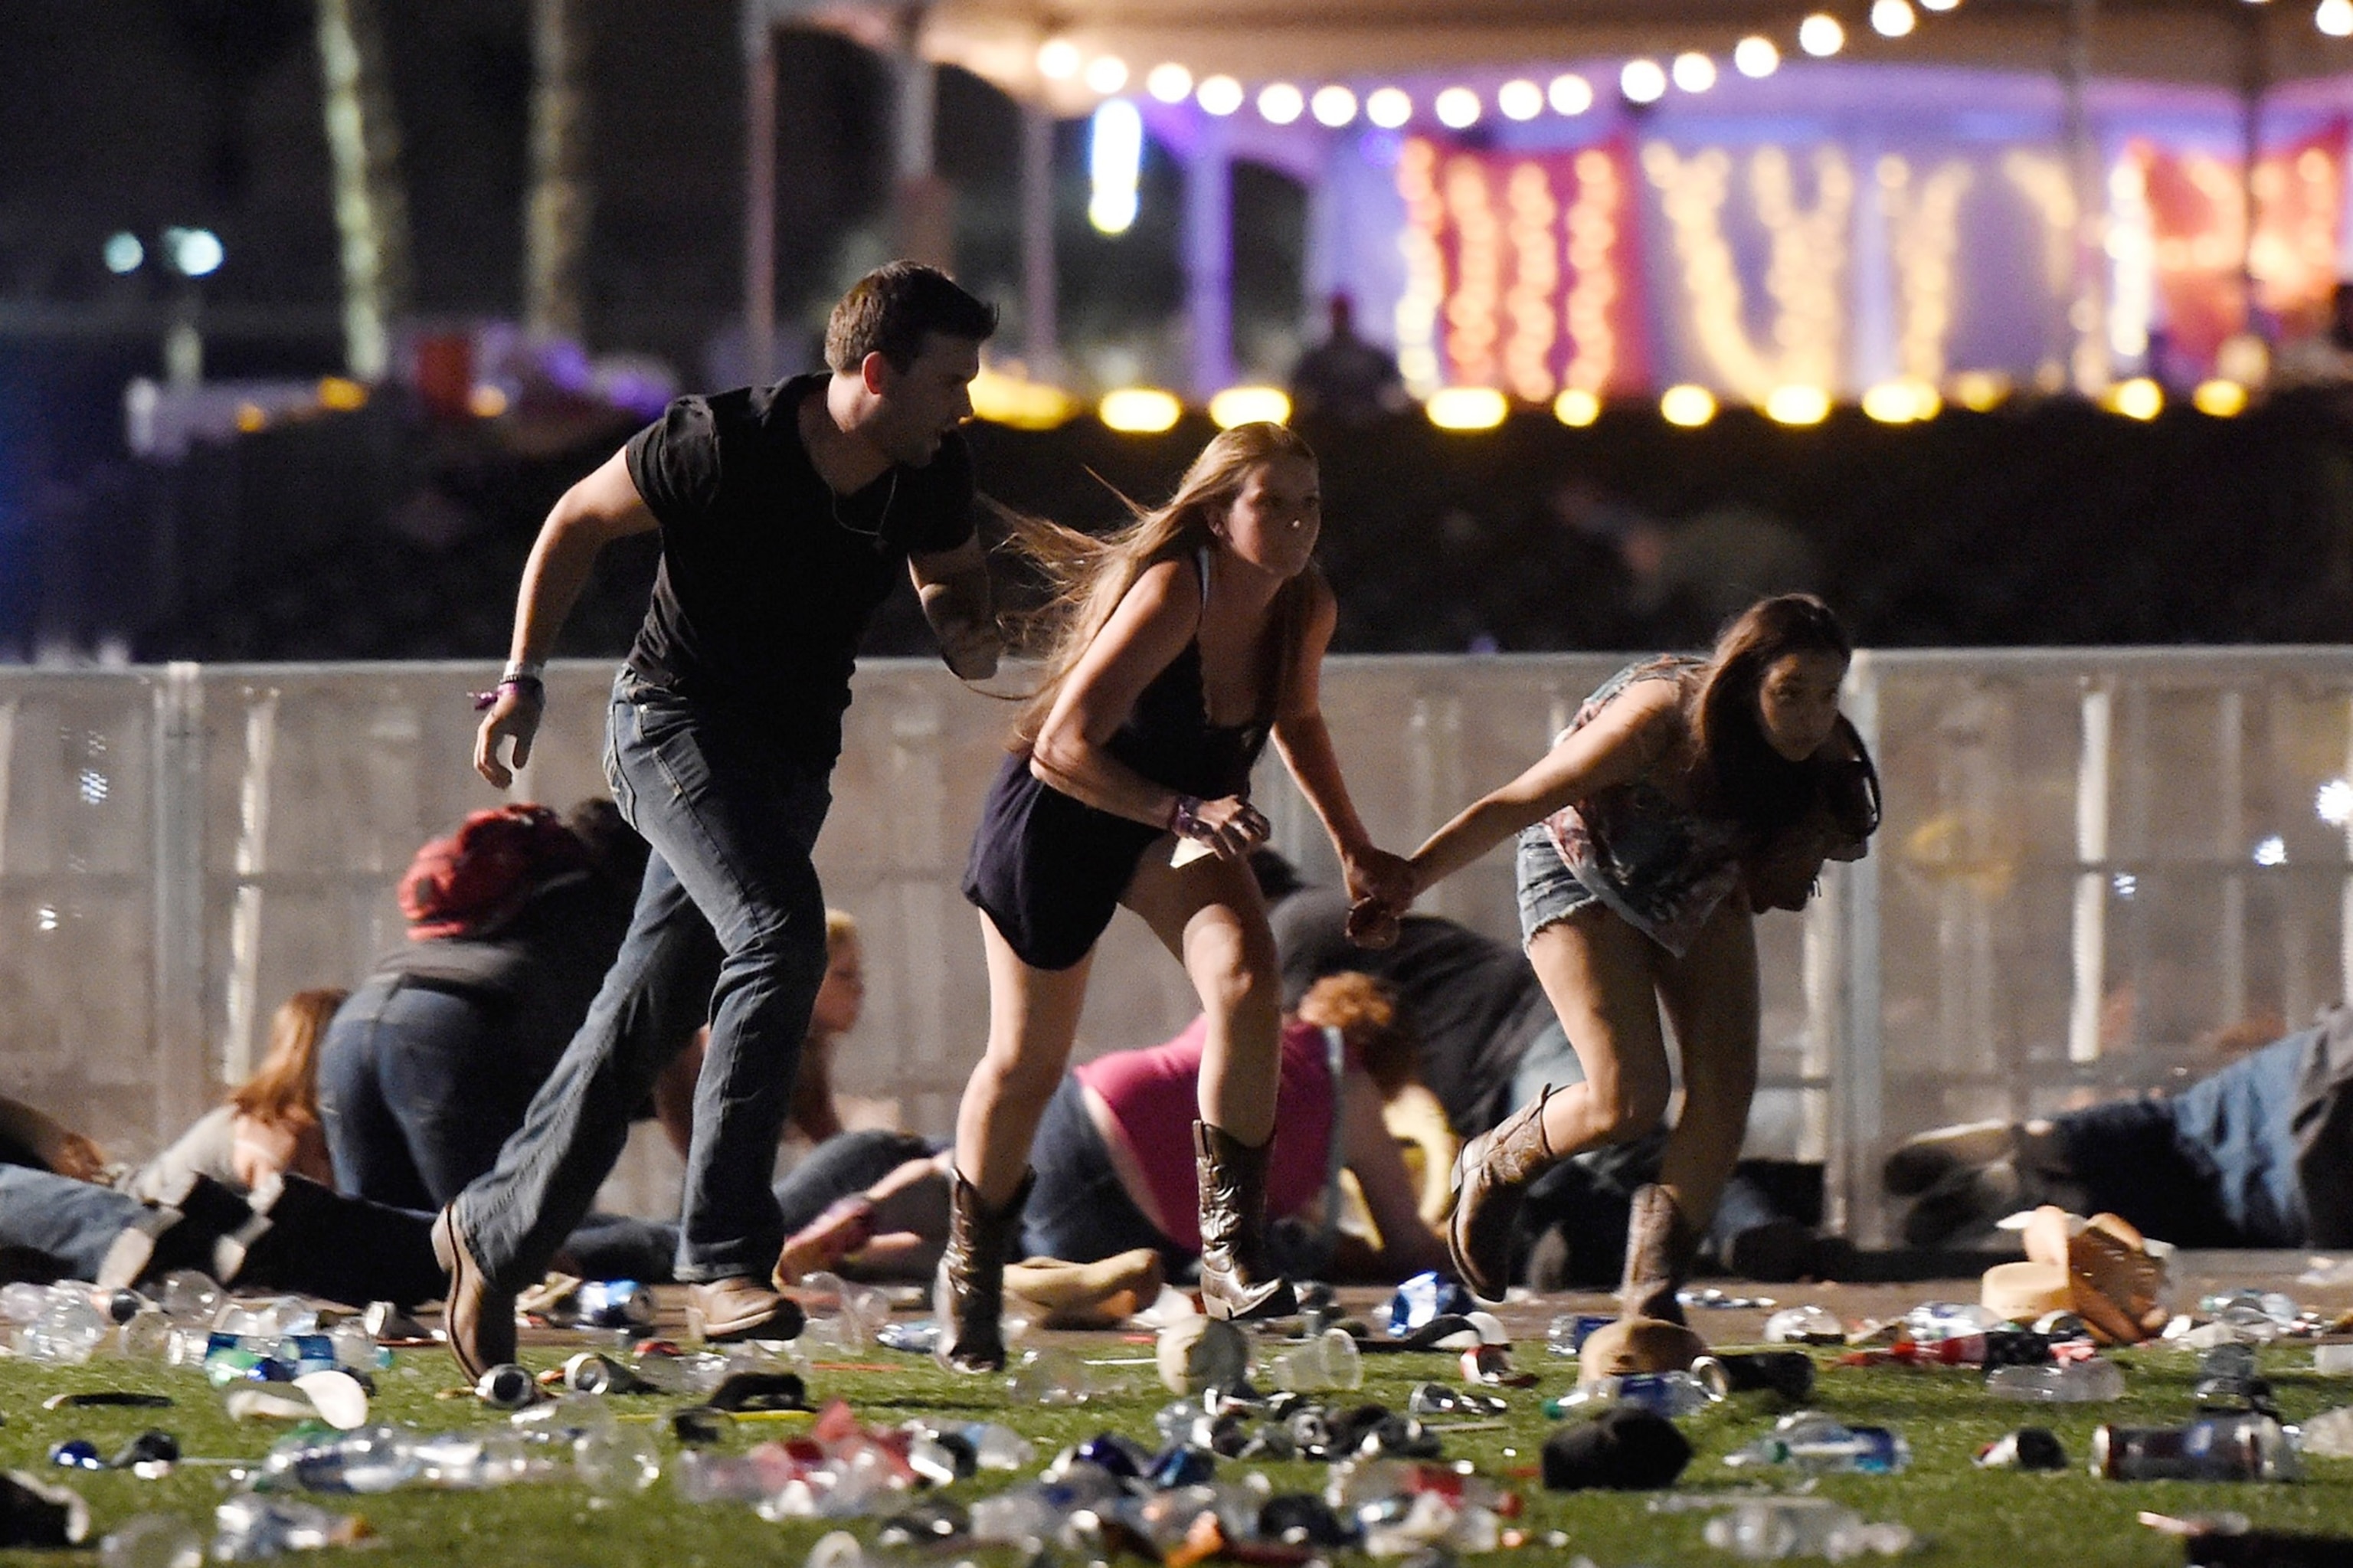 PHOTO: In this Oct. 1, 2017, file photo, people run from the Route 91 Harvest country music festival after apparent gun fire was heard, in Las Vegas.